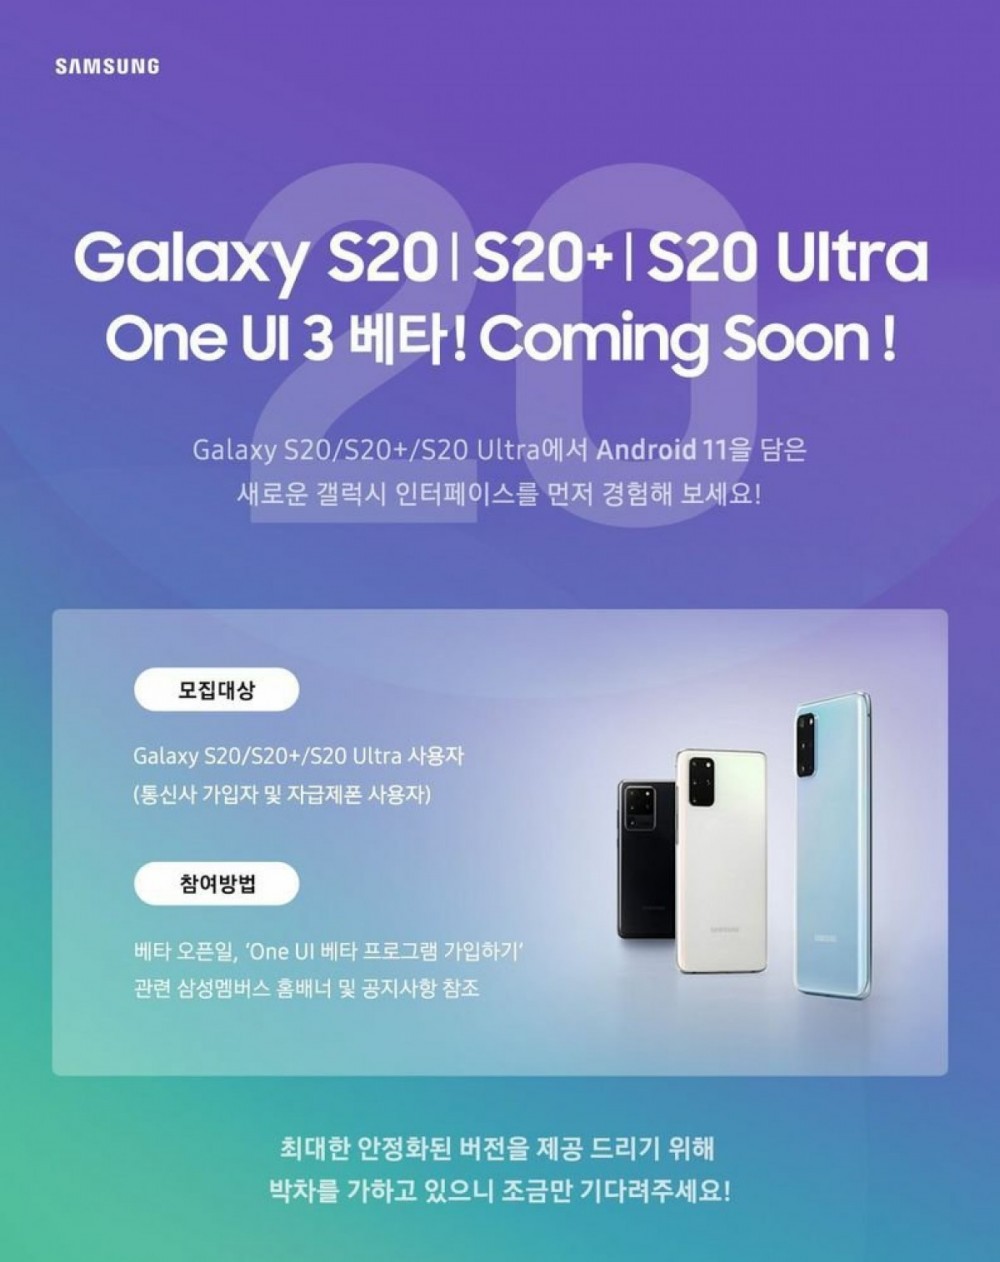 Samsung confirms One UI 3.0 Beta based on Android 11 coming to Galaxy S20 lineup